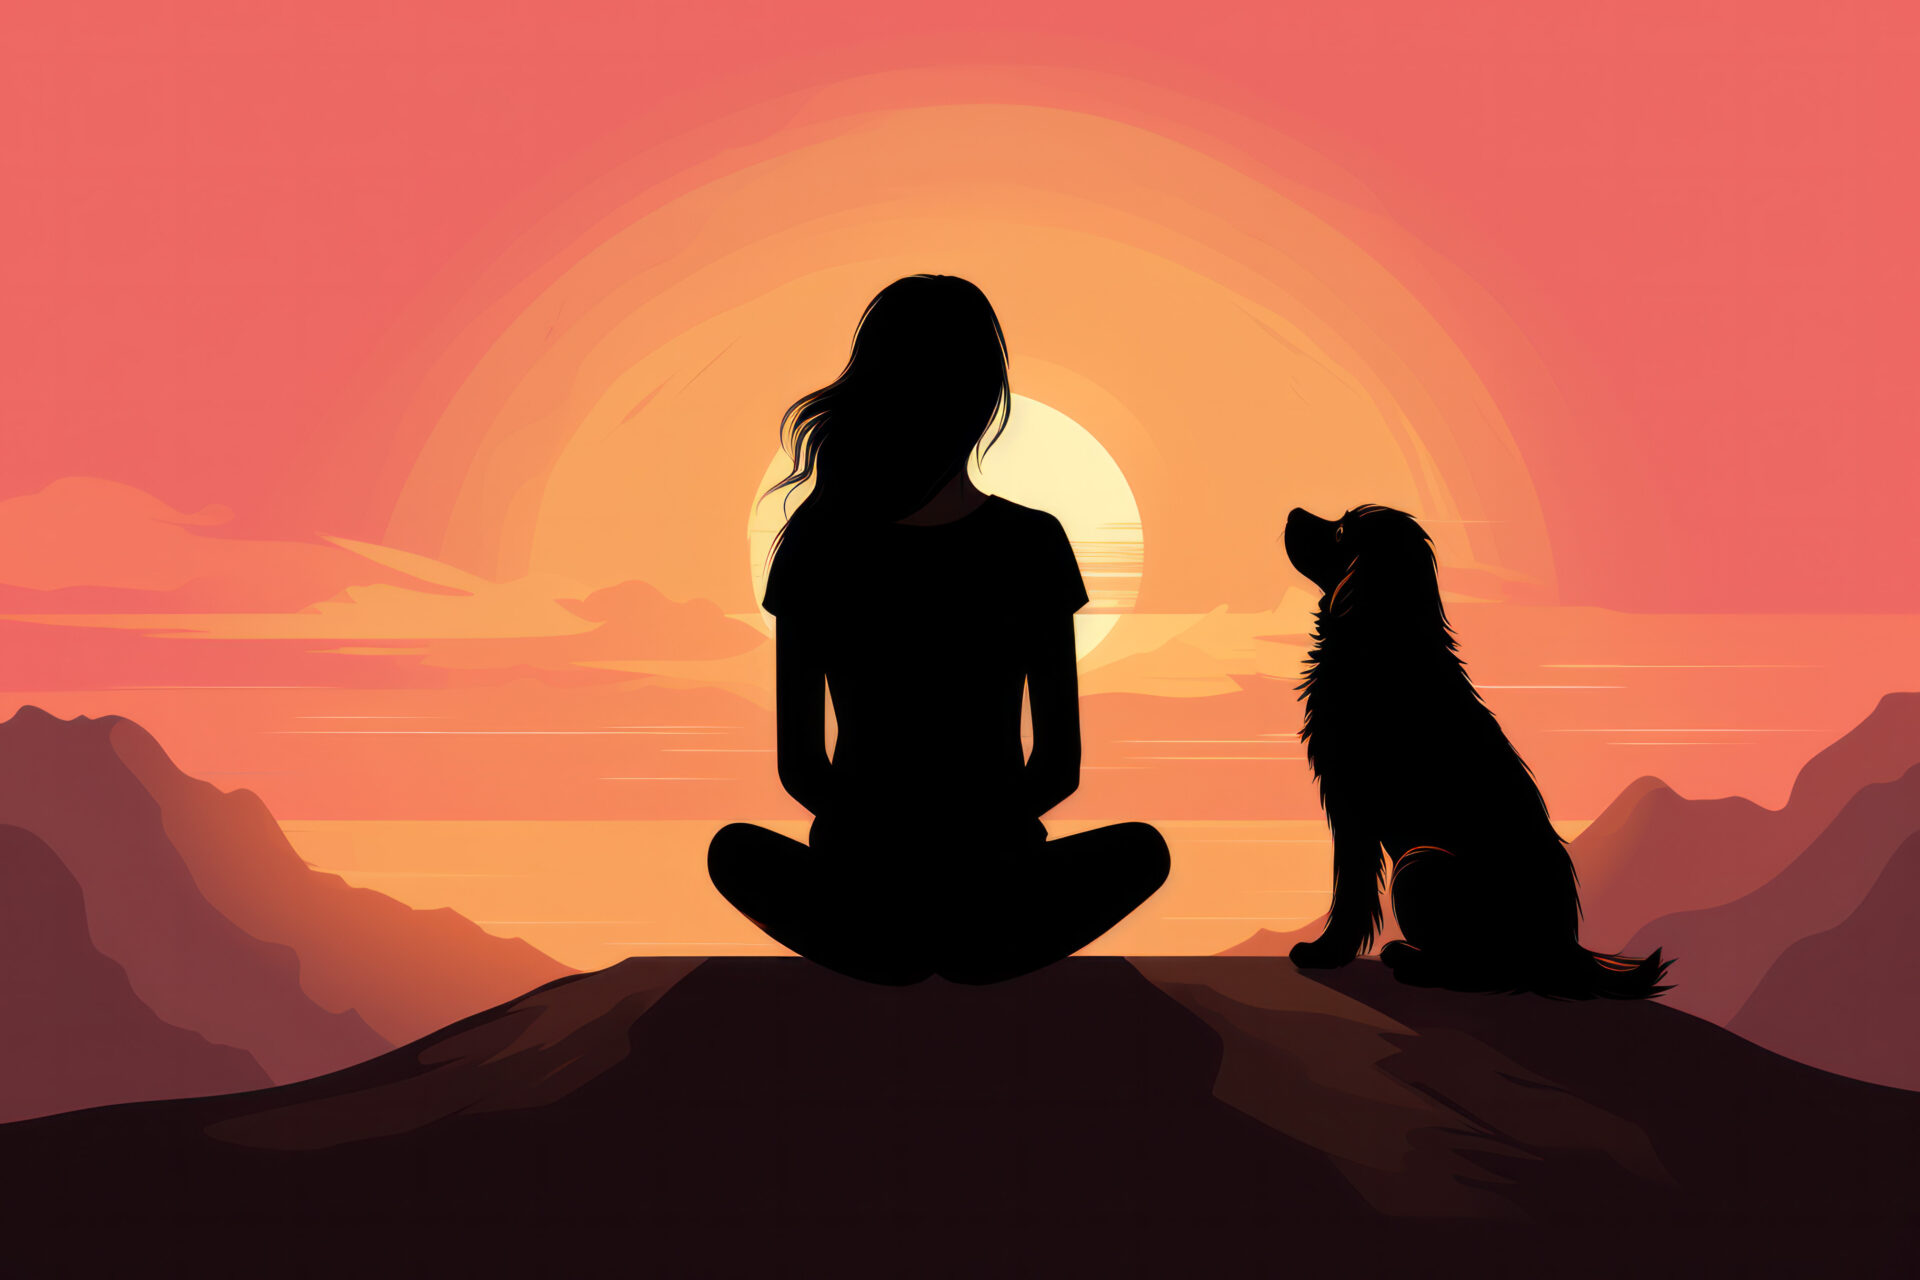 Woman and dog sitting in front of a sunset looking reflective